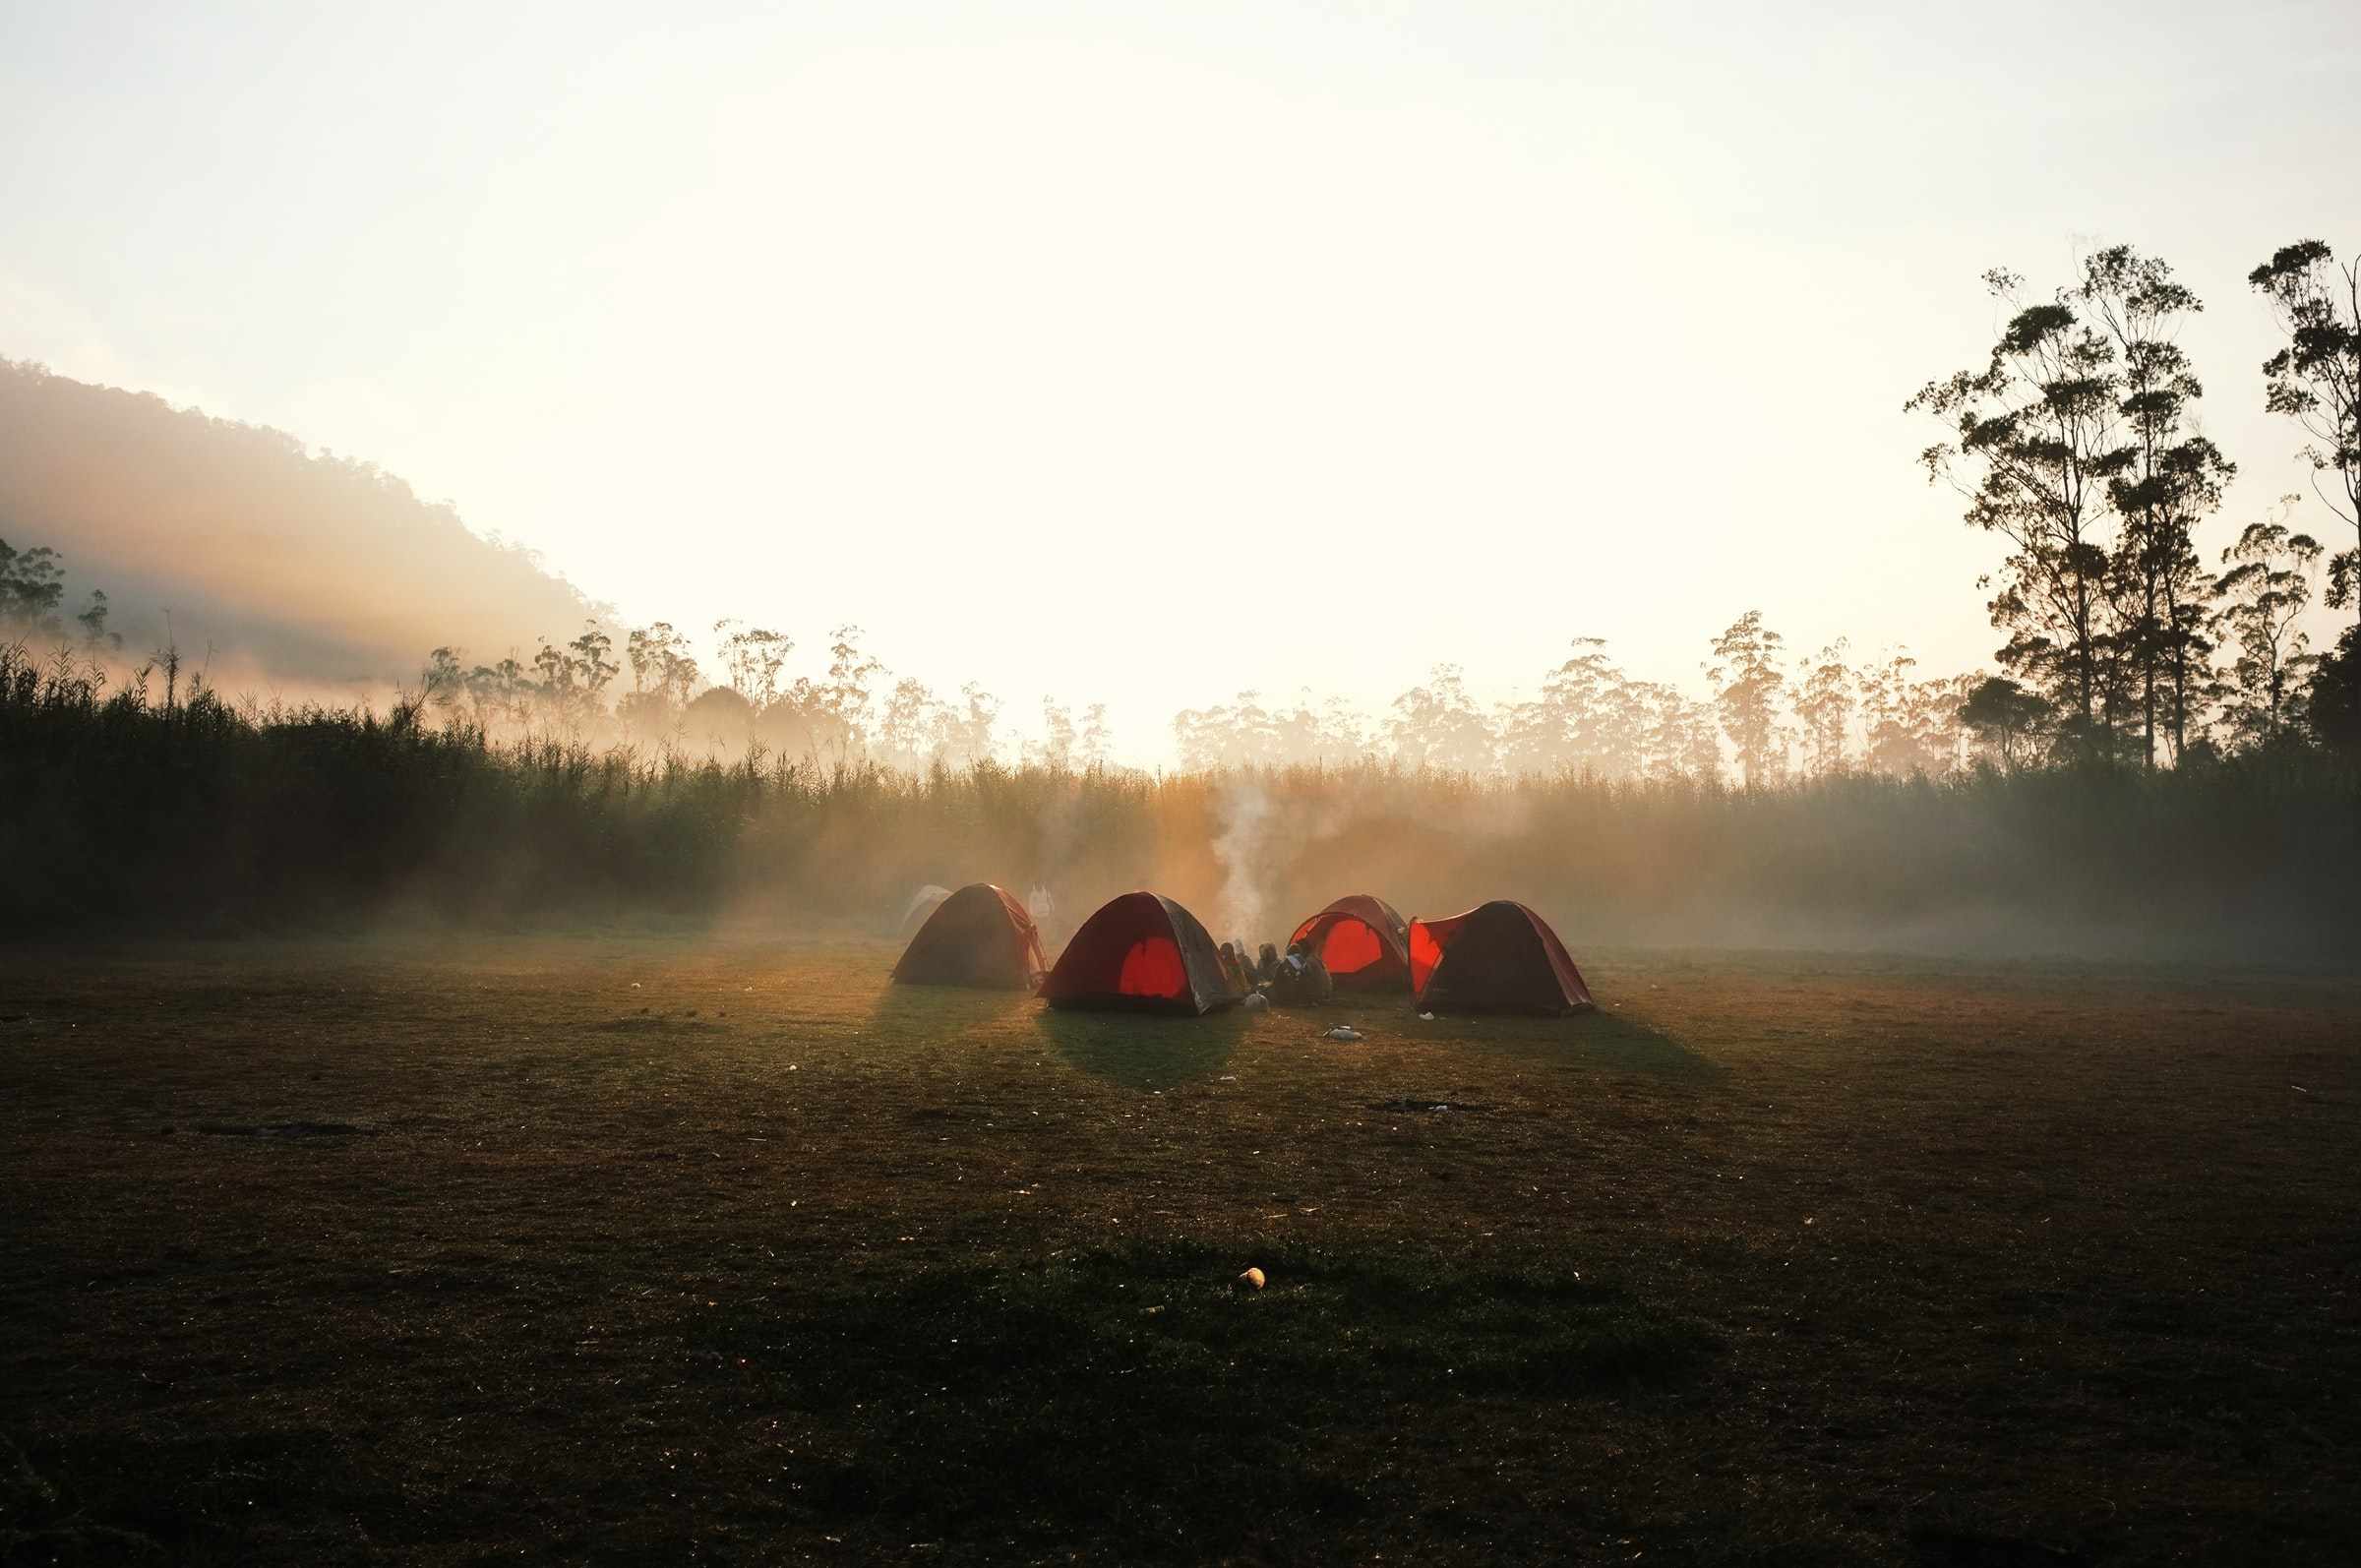 Camping setups: How to camp with a large group